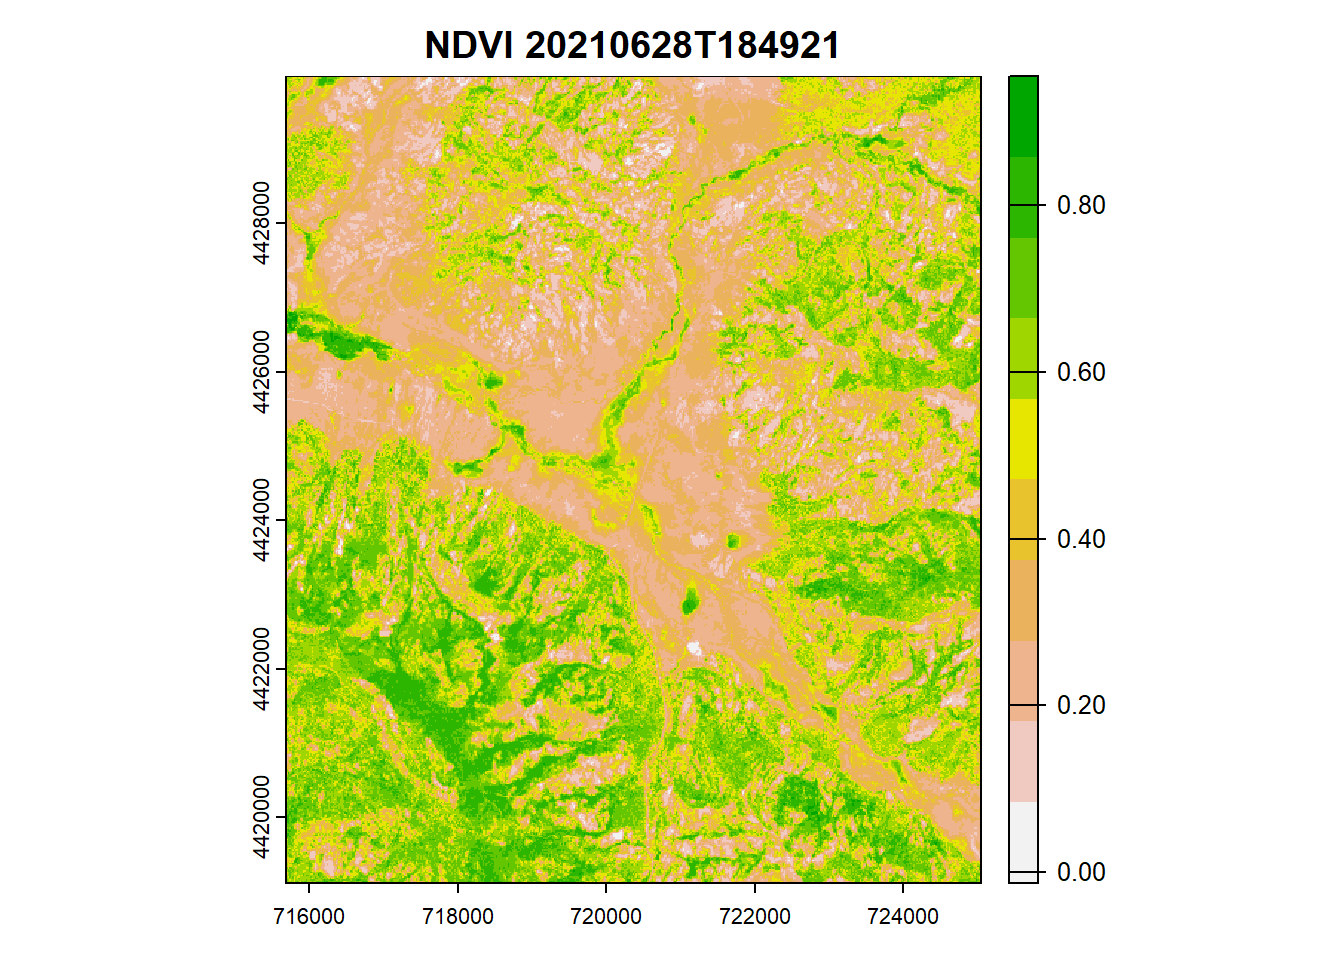 NDVI from Sentinel-2 image, 20210628